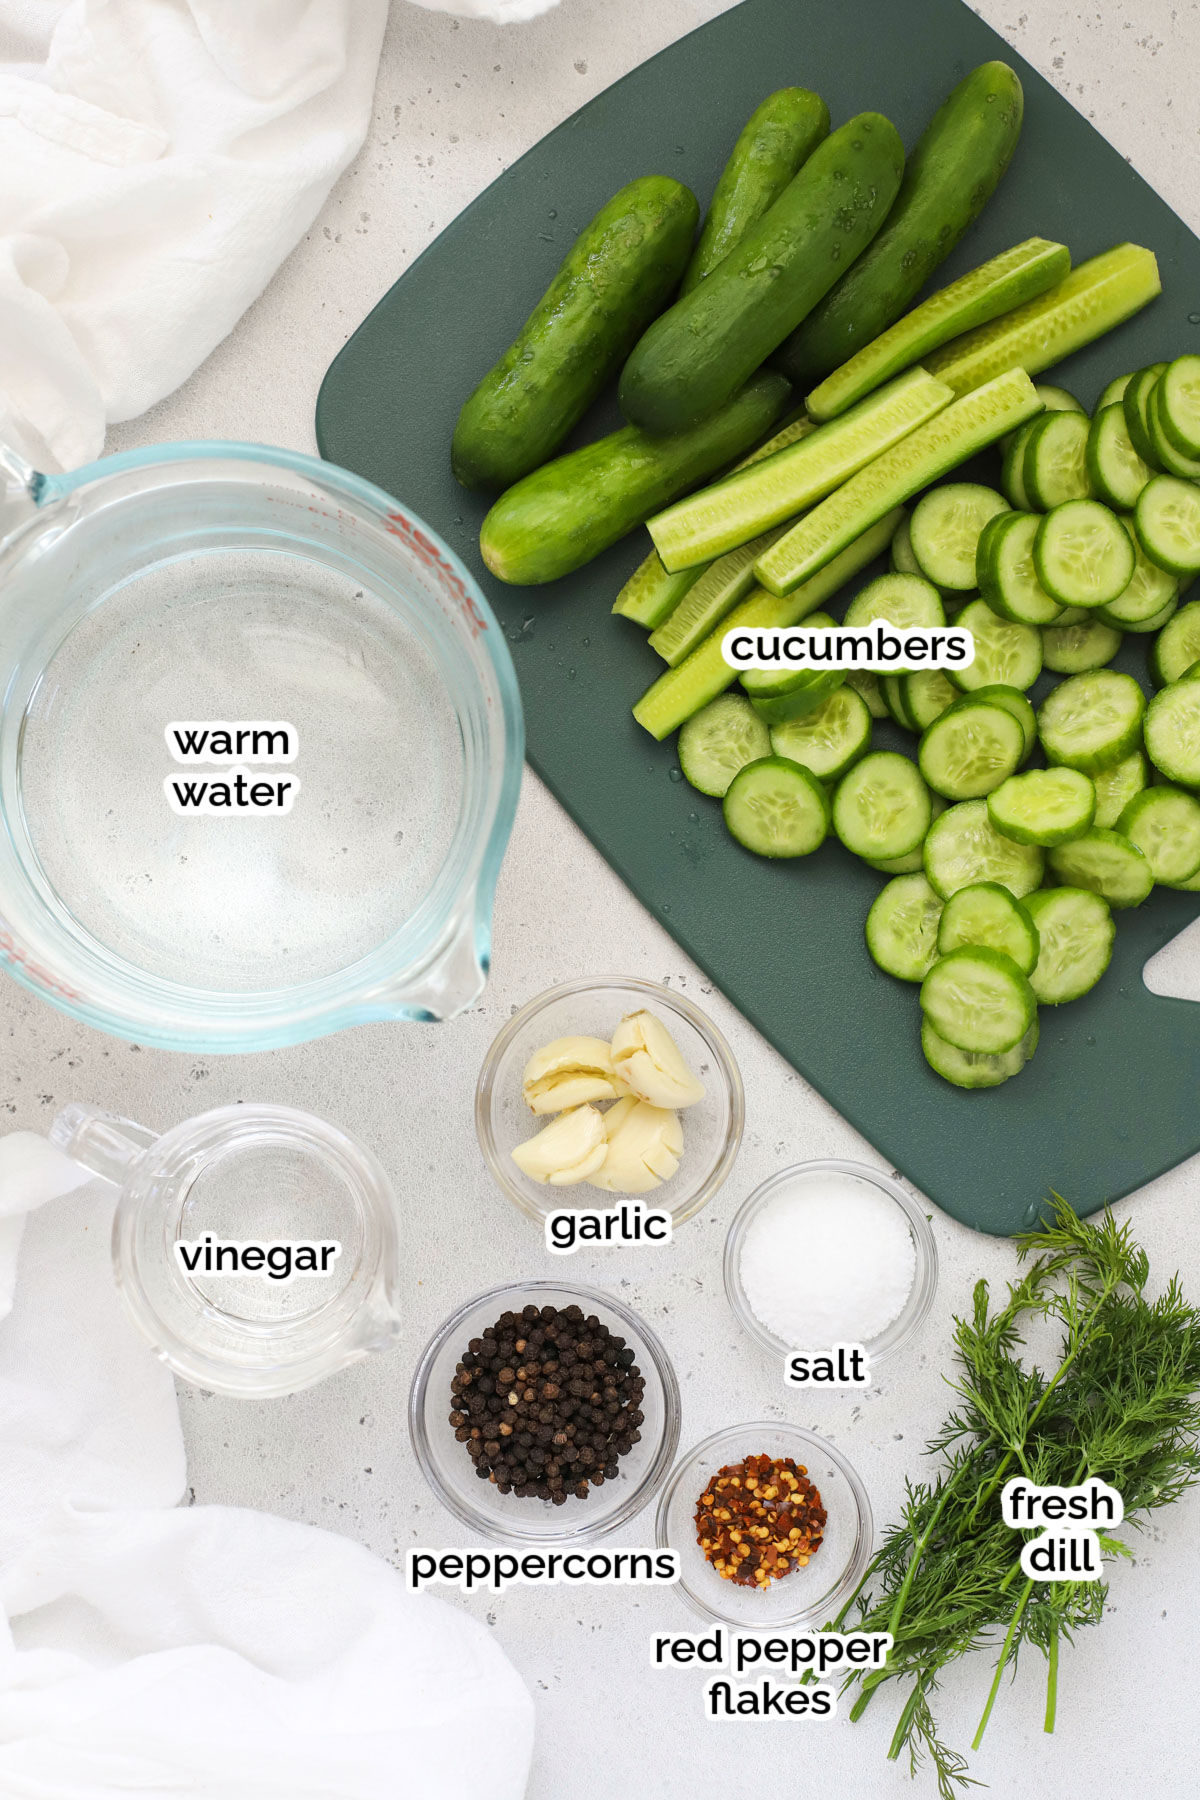 ingredients for refrigerator dill pickles